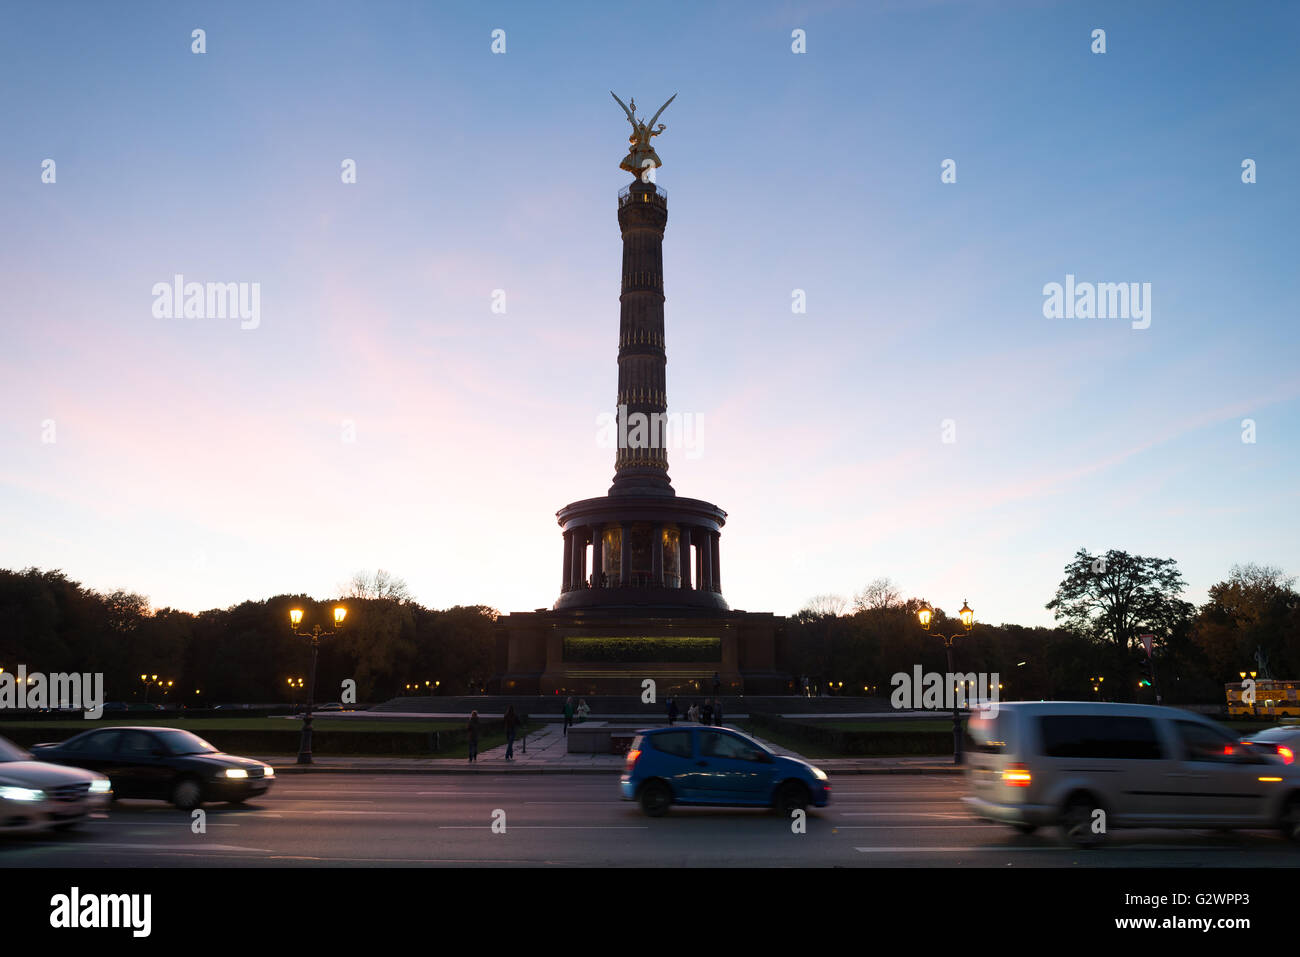 26.10.2015, Berlin, Berlin, Germany - The gilded angel Viktoria on the Victory Column at the Great Star in Berlin-Tiergarten. 0JL151026D029CAROEX.JPG - NOT for SALE in G E R M A N Y, A U S T R I A, S W I T Z E R L A N D [MODEL RELEASE: NOT APPLICABLE, PROPERTY RELEASE: NO, (c) caro photo agency / Lederbogen, http://www.caro-images.com, info@carofoto.pl - Any use of this picture is subject to royalty!] Stock Photo